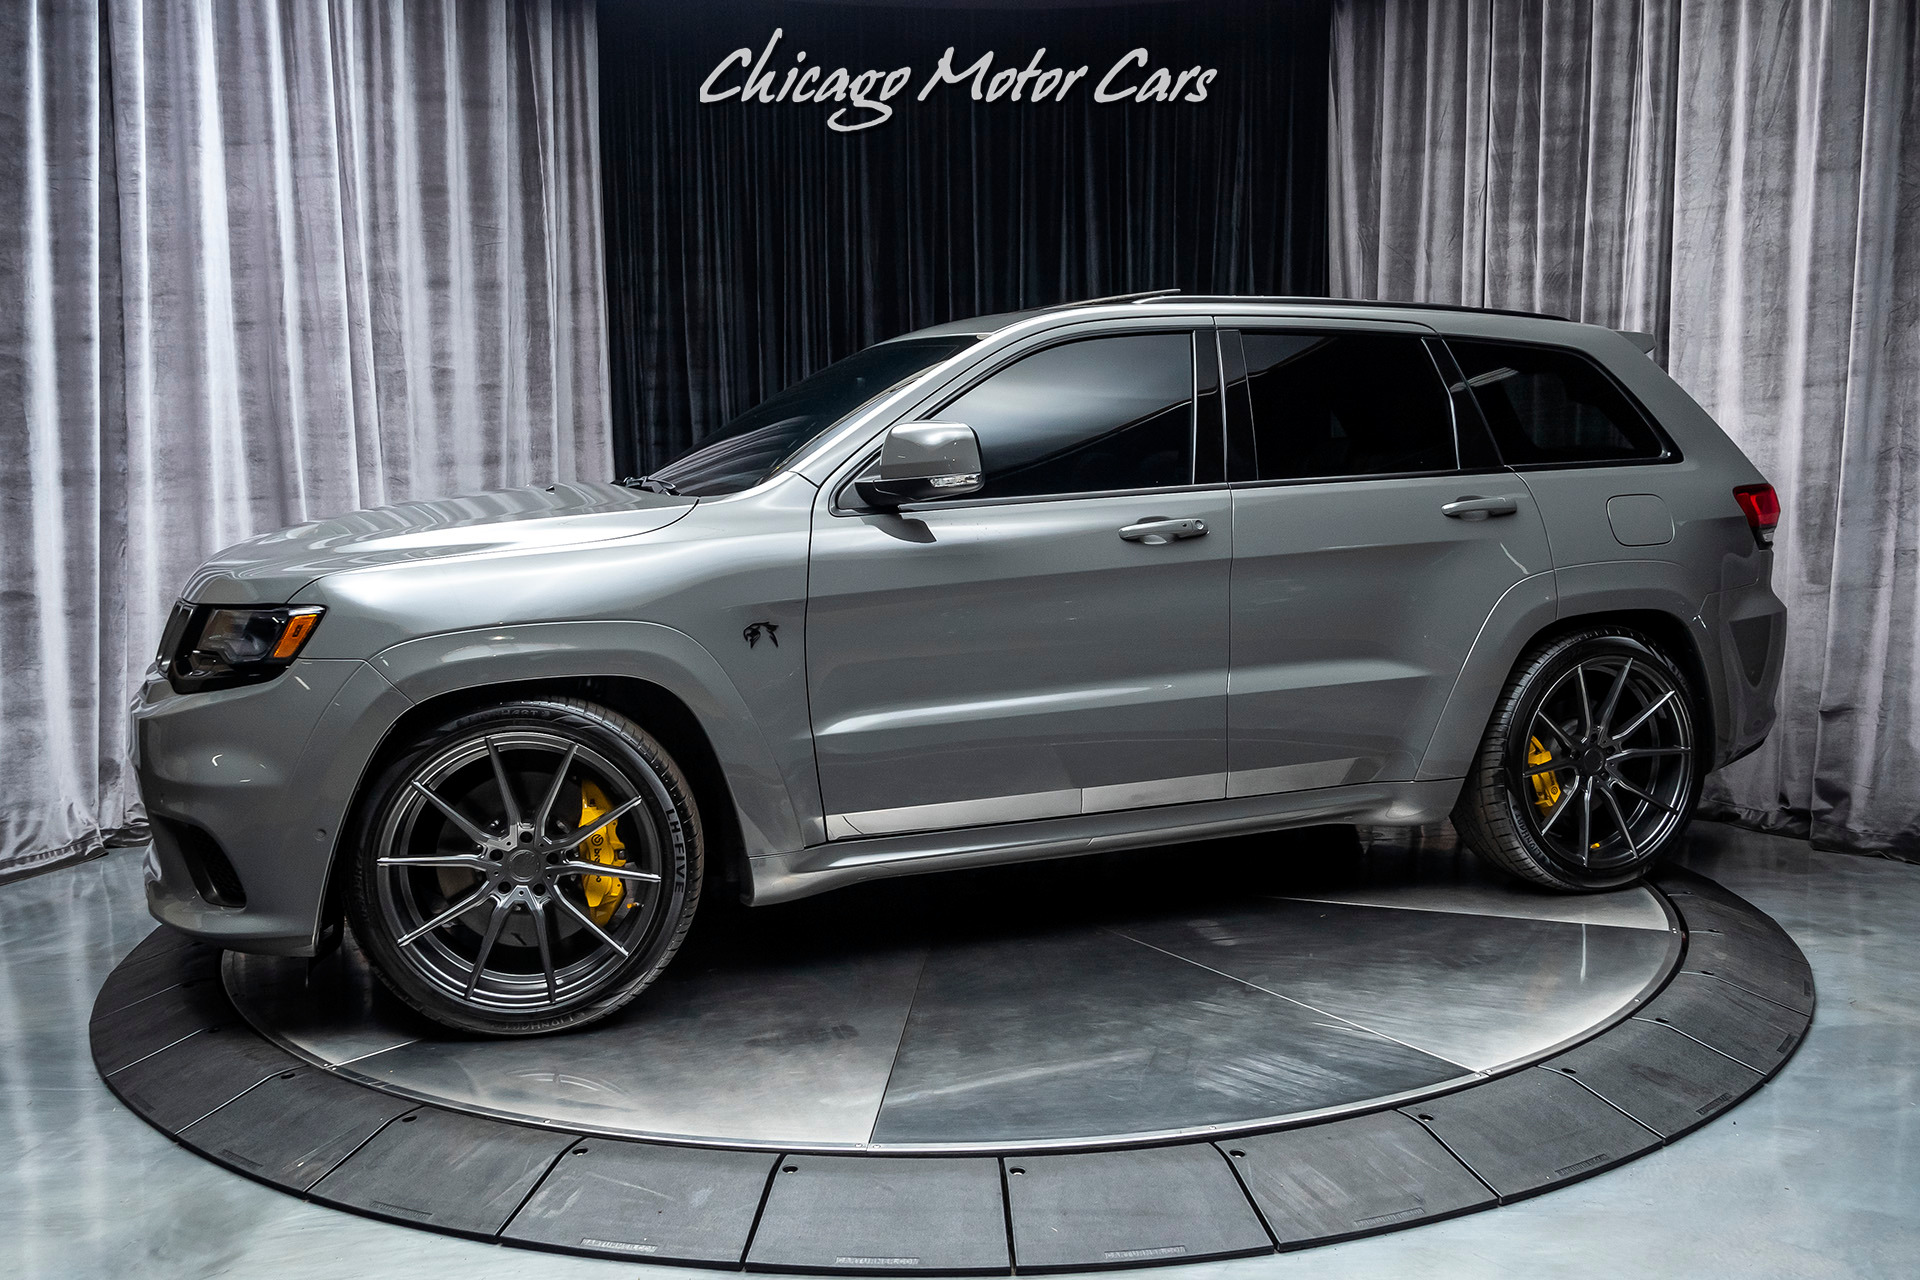 Used-2019-Jeep-Grand-Cherokee-Trackhawk-SUV-MSRP-98K-SIGNATURE-LEATHER-BEST-COLOR-Upgrades